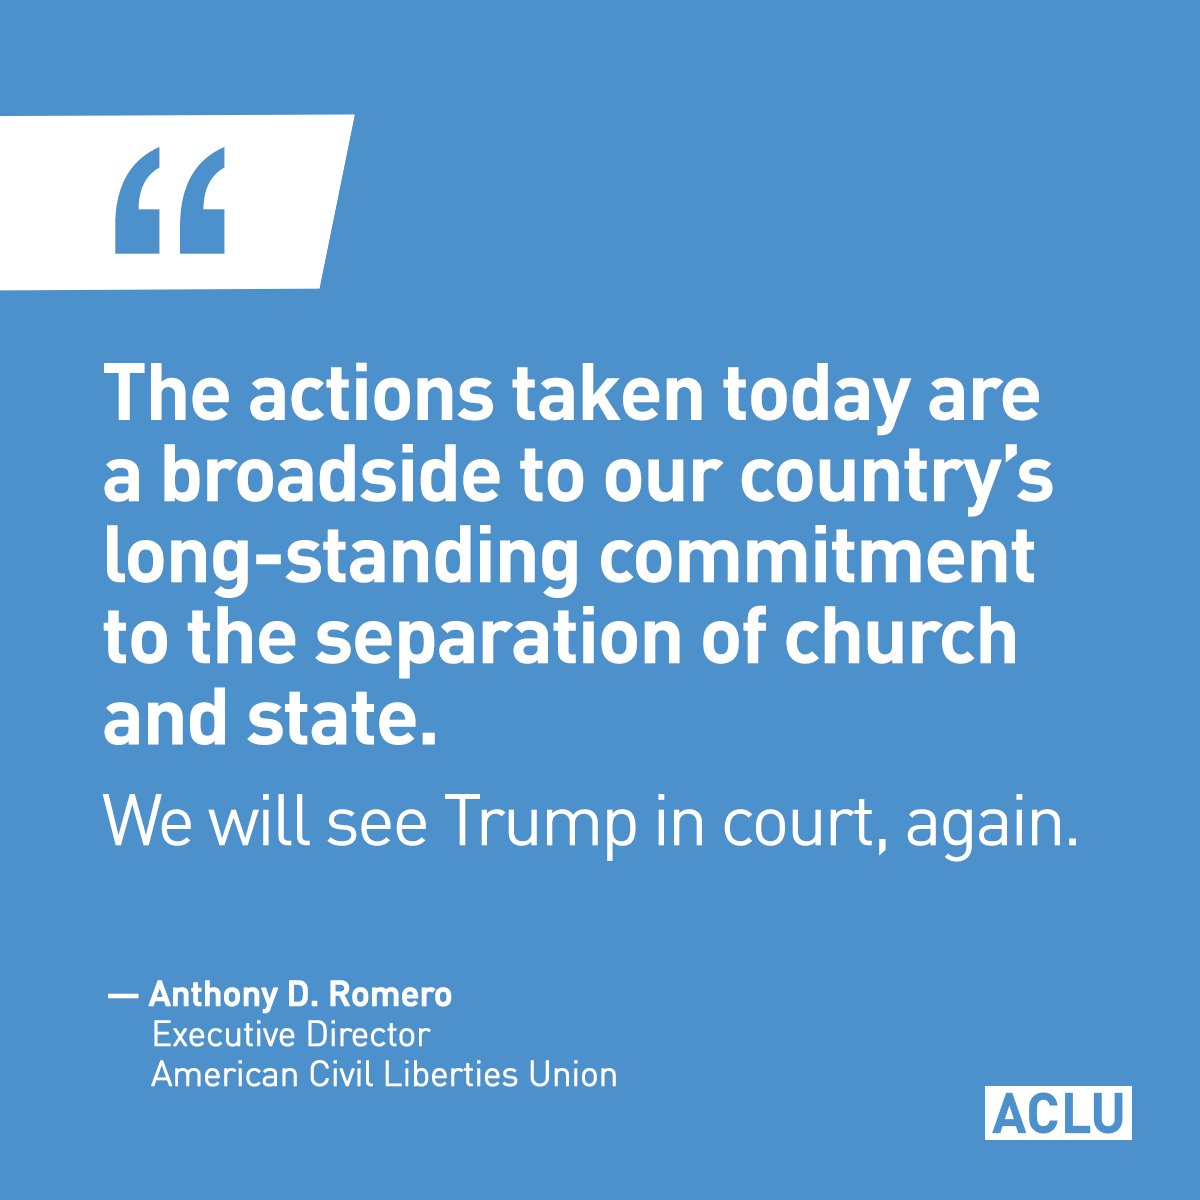 RT @ACLU: Our freedom of religion is not a #LicenseToDiscriminate. 

@POTUS, we will see you in court, again. https://t.co/JZgaWcu6Px